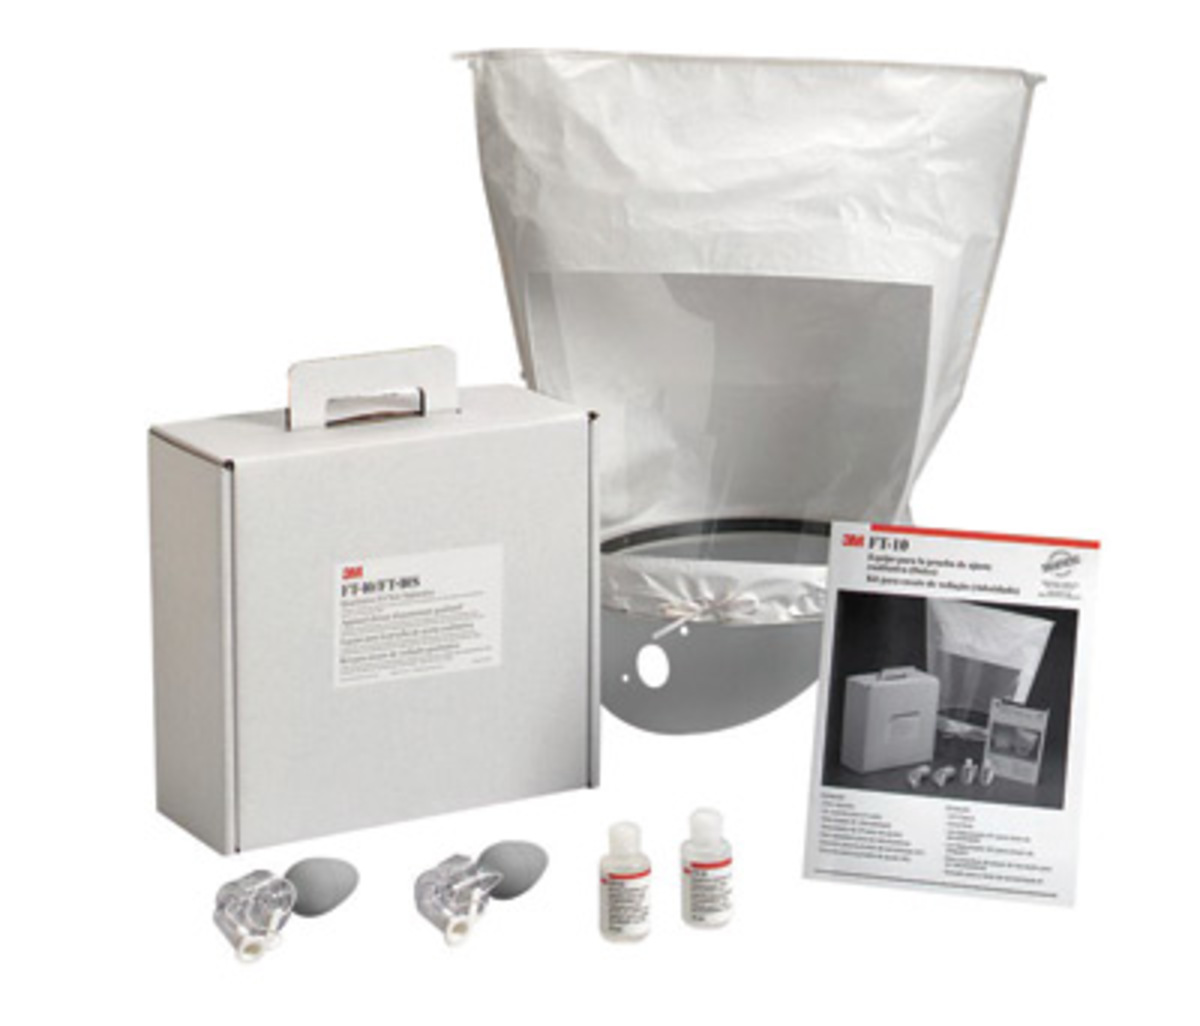 3M™ Qualitative Fit Testing Kit For 3M™ Any Particulate or Gas/Vapor Respirator With Particulate Prefilter (Availability restric